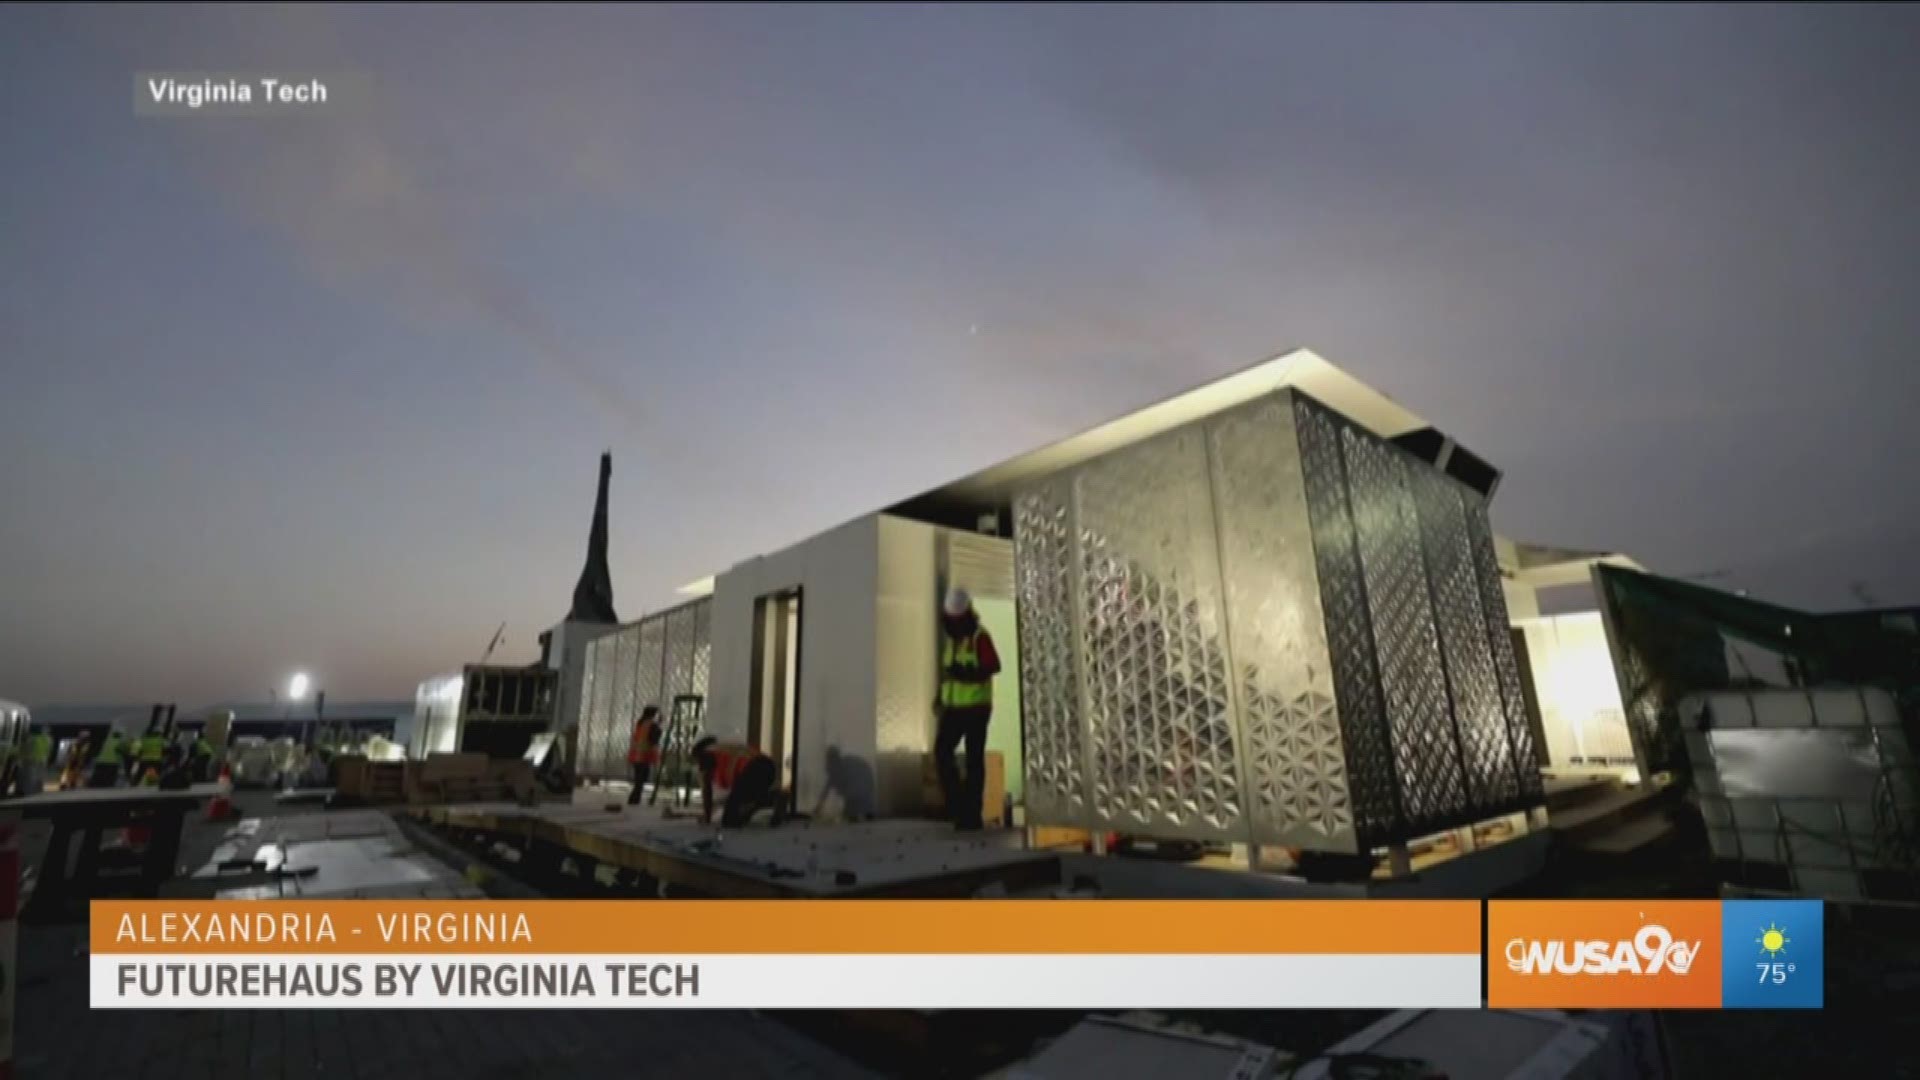 Virginia Tech takes an international award for their house of the future, literally called Futurehaus, which is set to disrupt the future of the housing industry. For more information xfinity.com or call 1-800-xfinity.